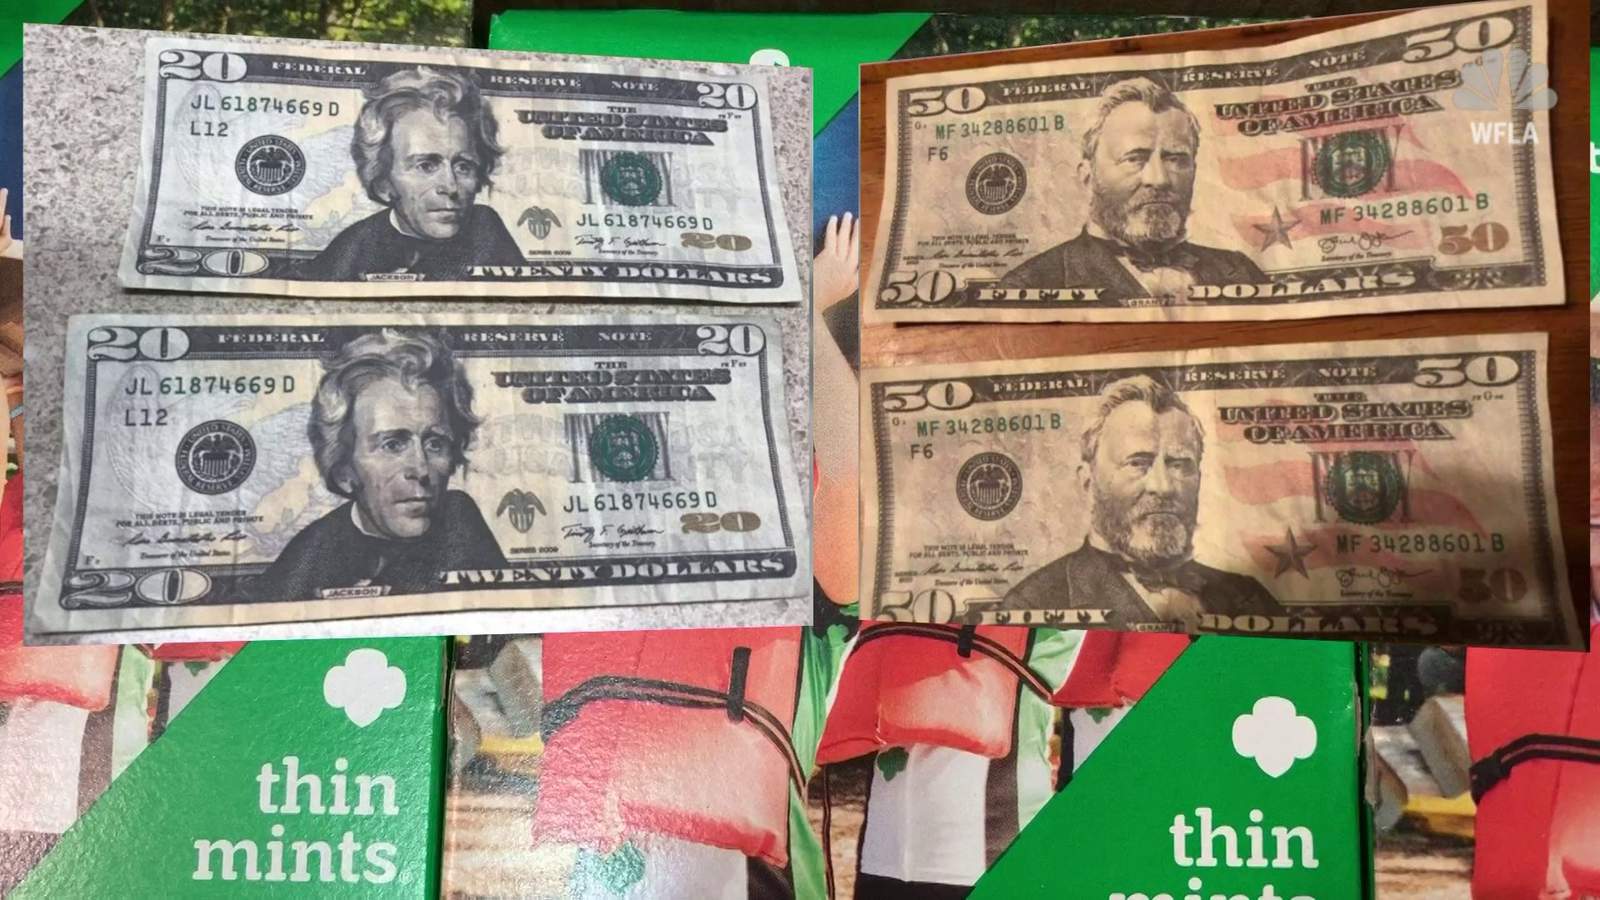 Crooks & cookies: Counterfeiters target Girl Scouts